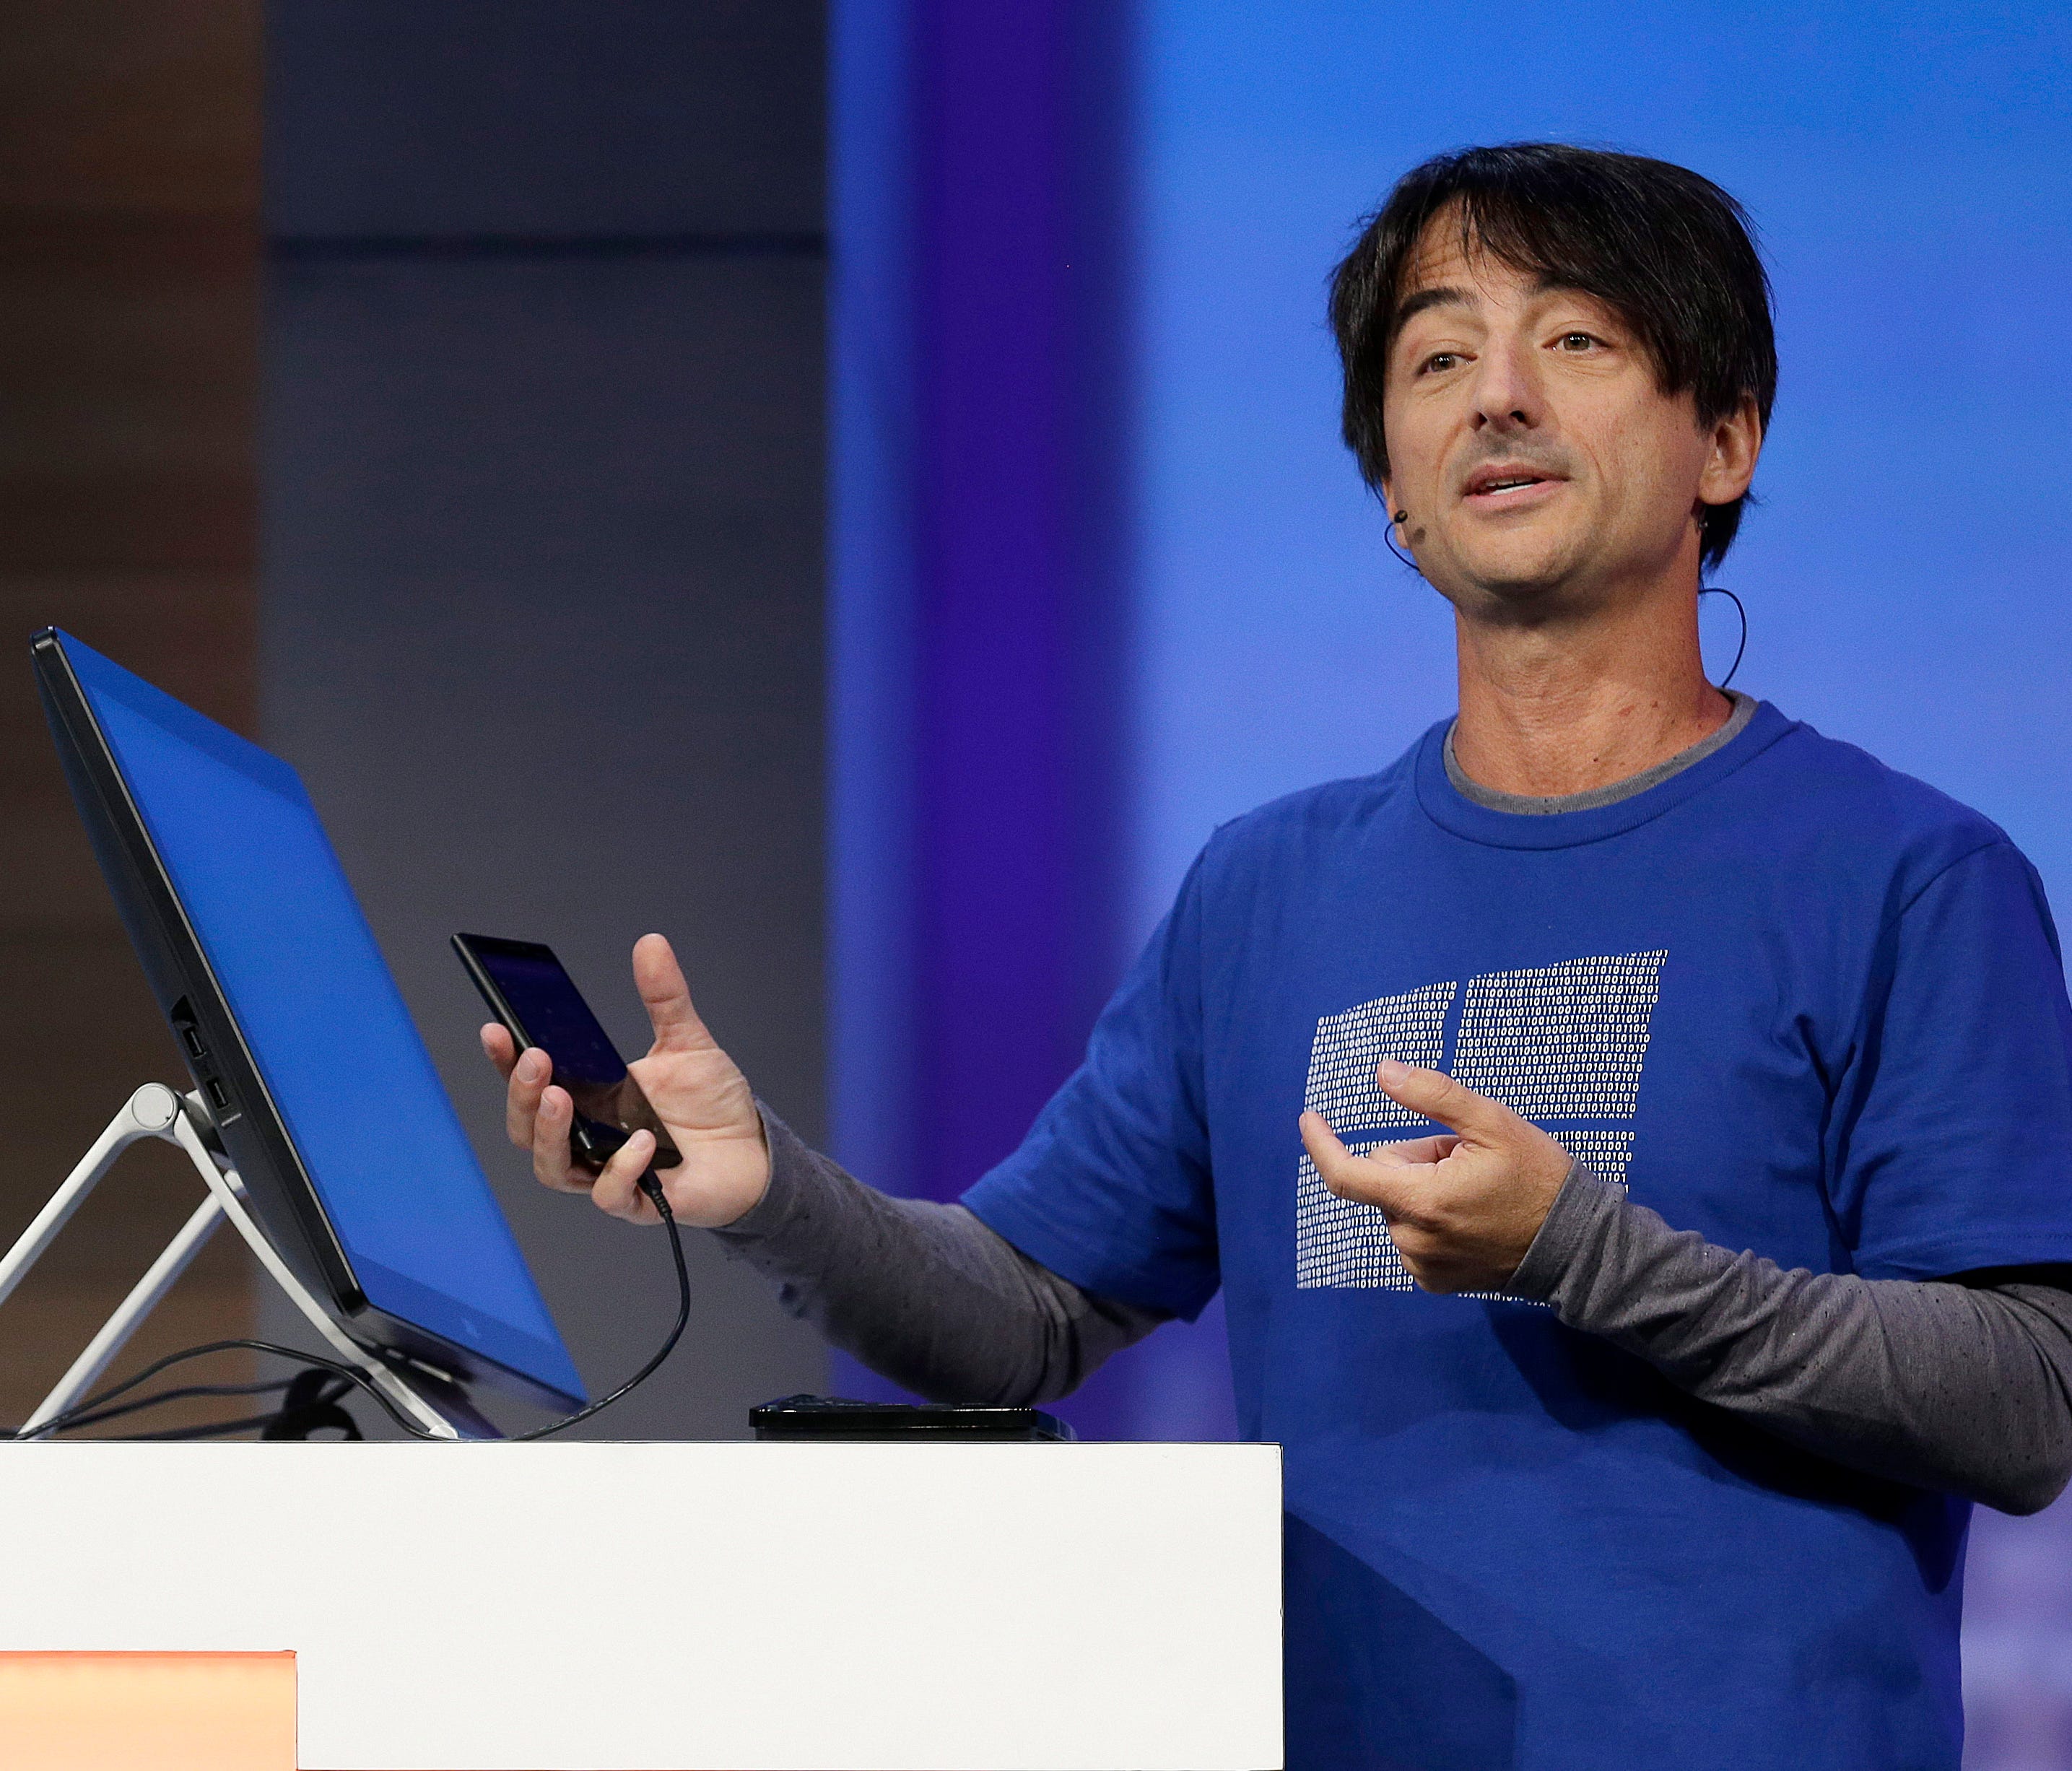 Joe Belfiore, Microsoft Corporate Vice President of Operating Systems Group, demonstrates Continuum for phones at the Microsoft Build conference in San Francisco, Wednesday, April 29, 2015.